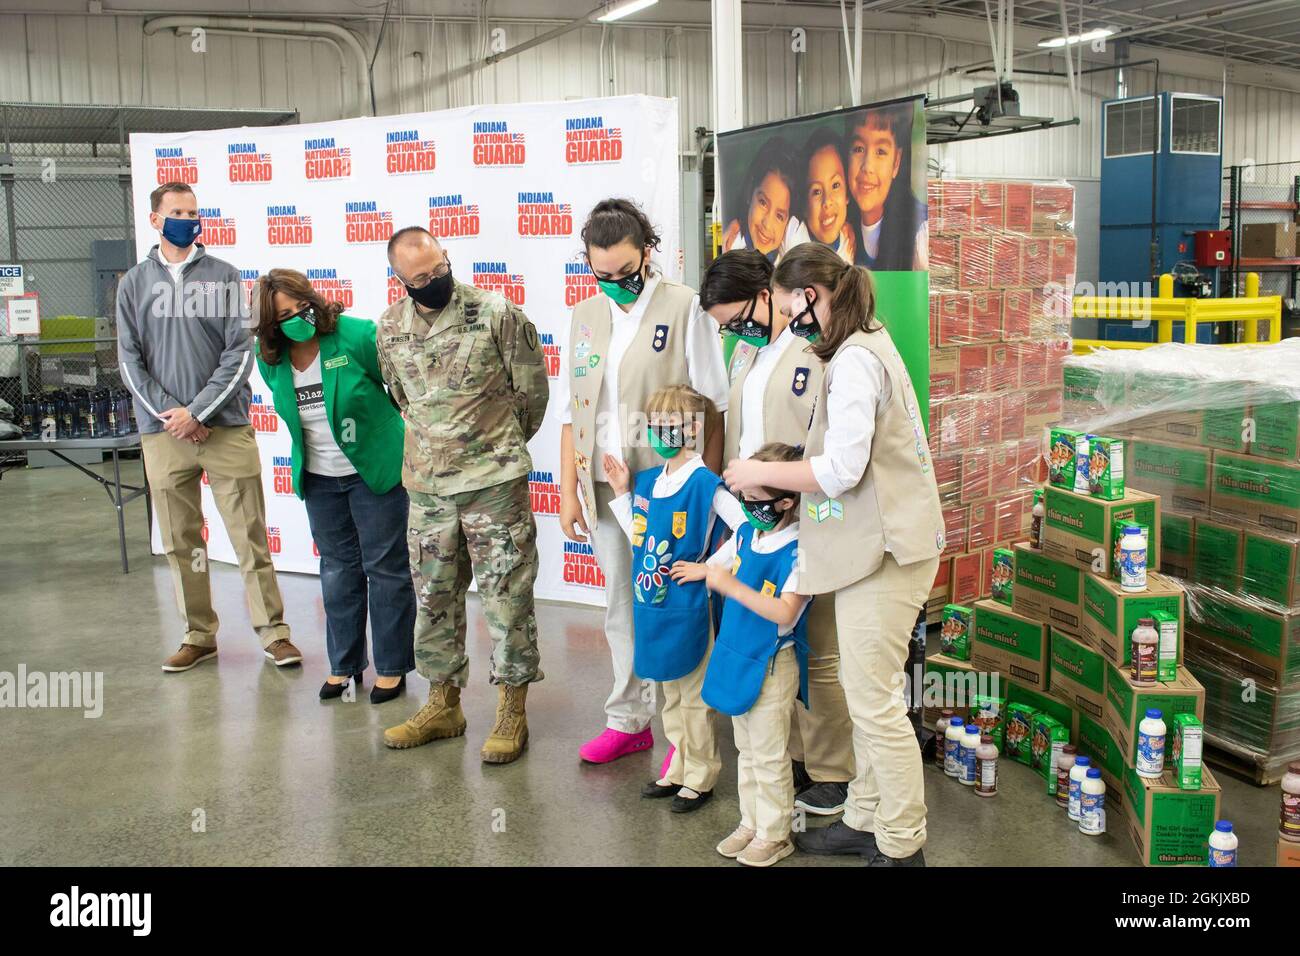 On Friday, May 7th, the Girl Scouts of America donated 48,000 packages of cookies to the Indiana National Guard at Stout Field in Indianapolis, IN.     Brig. Gen. Winslow was there to receive the pallets of cookies from uniformed Girl Scouts and Danielle Shockey, chief executive officer of Girl Scouts of Central Indiana. Stock Photo